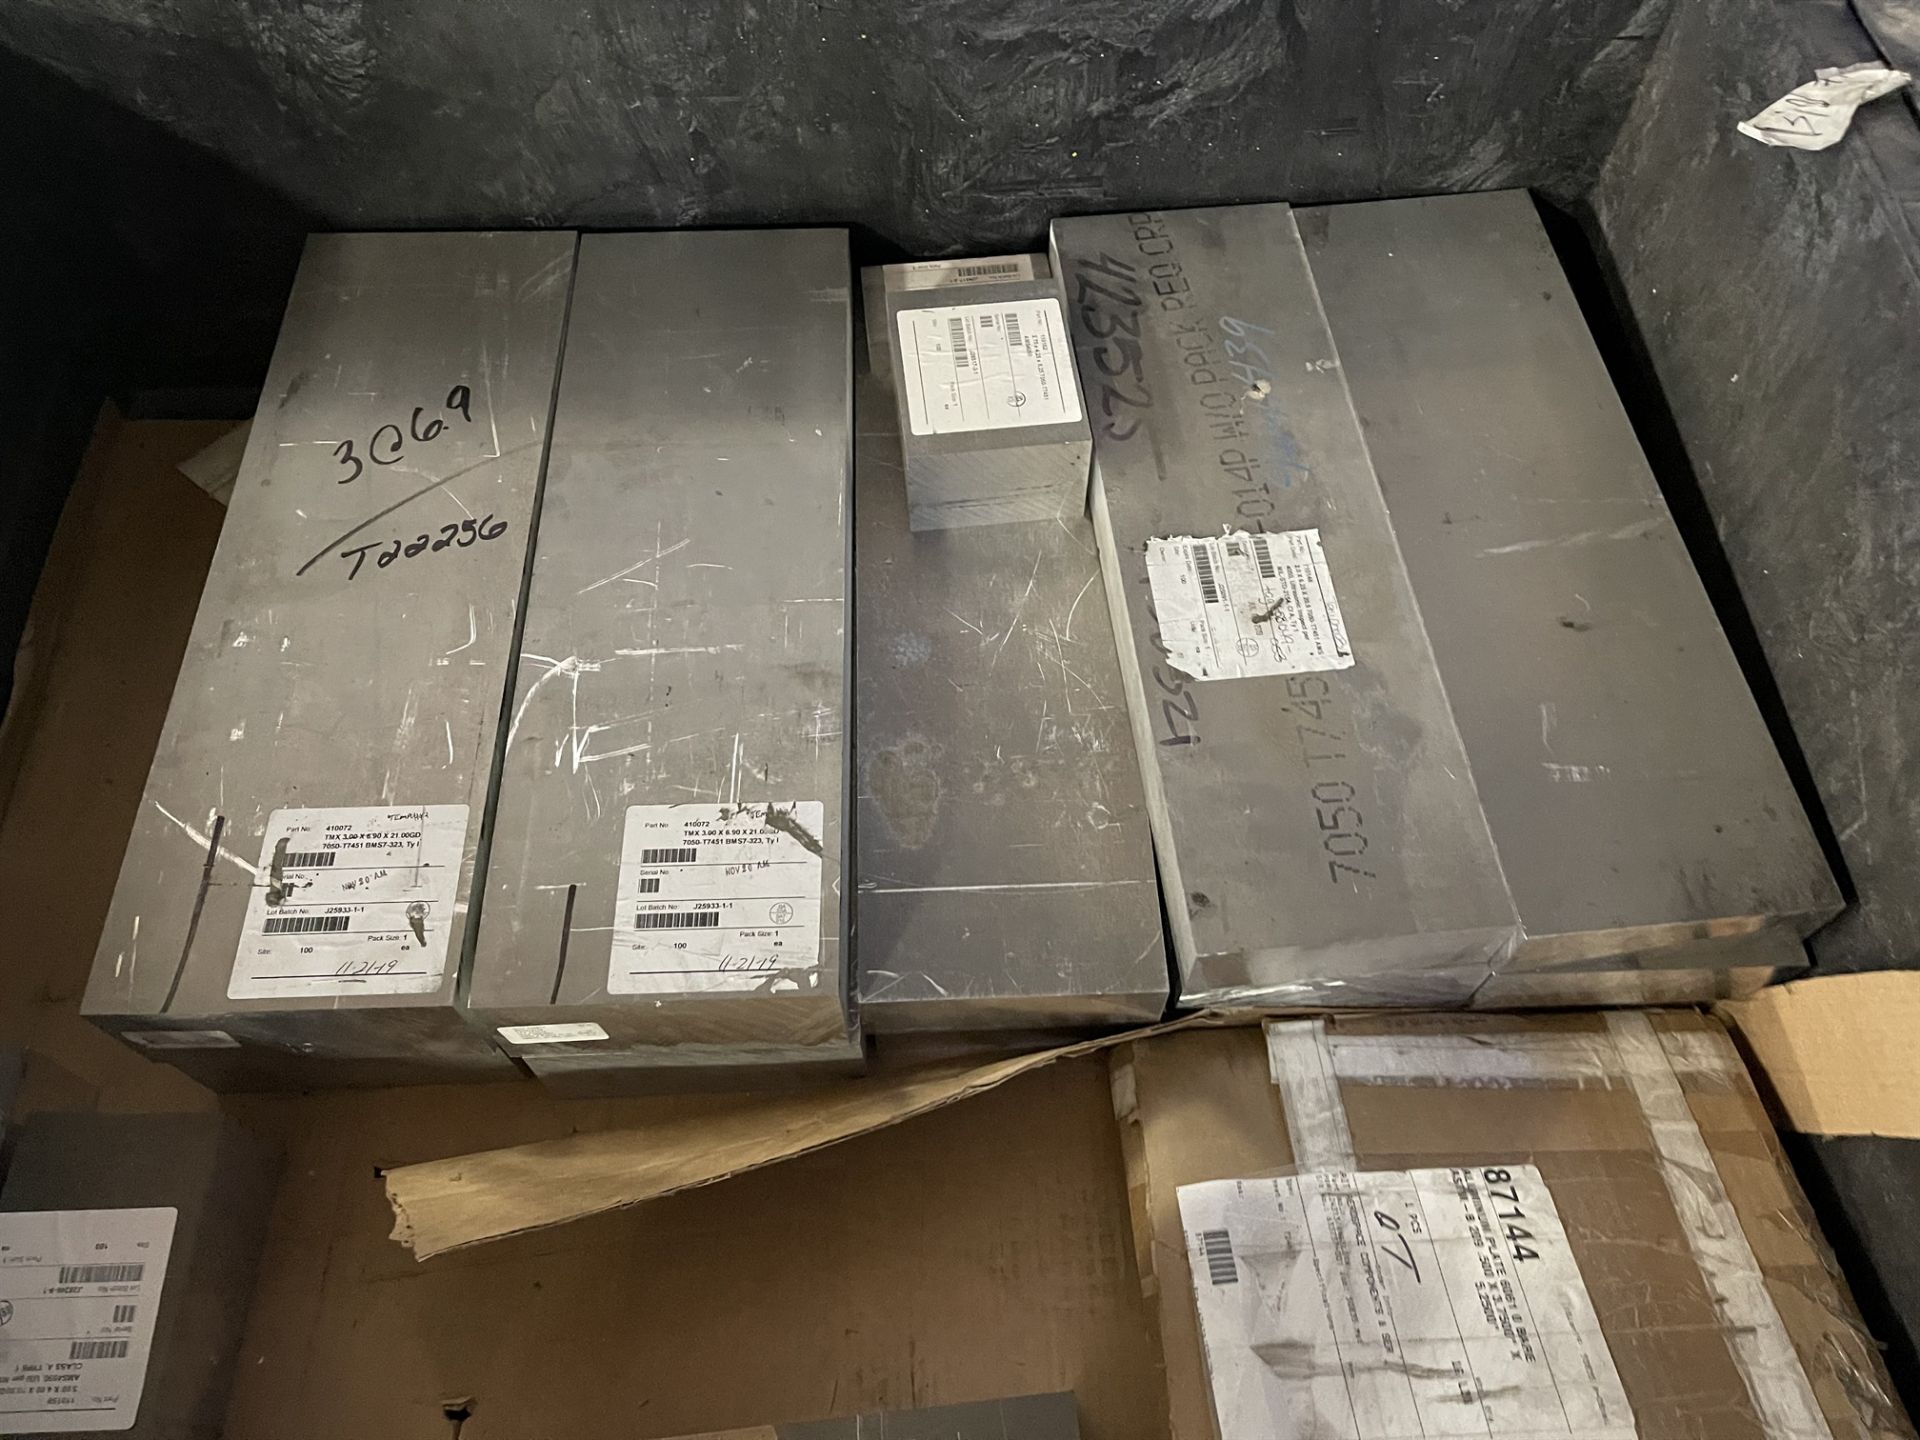 Lot Comprising (3) Collapsible Crates w/ Assorted 6AL-4V AMS4911 Titanium Block and 7050-T7451- - Image 13 of 23